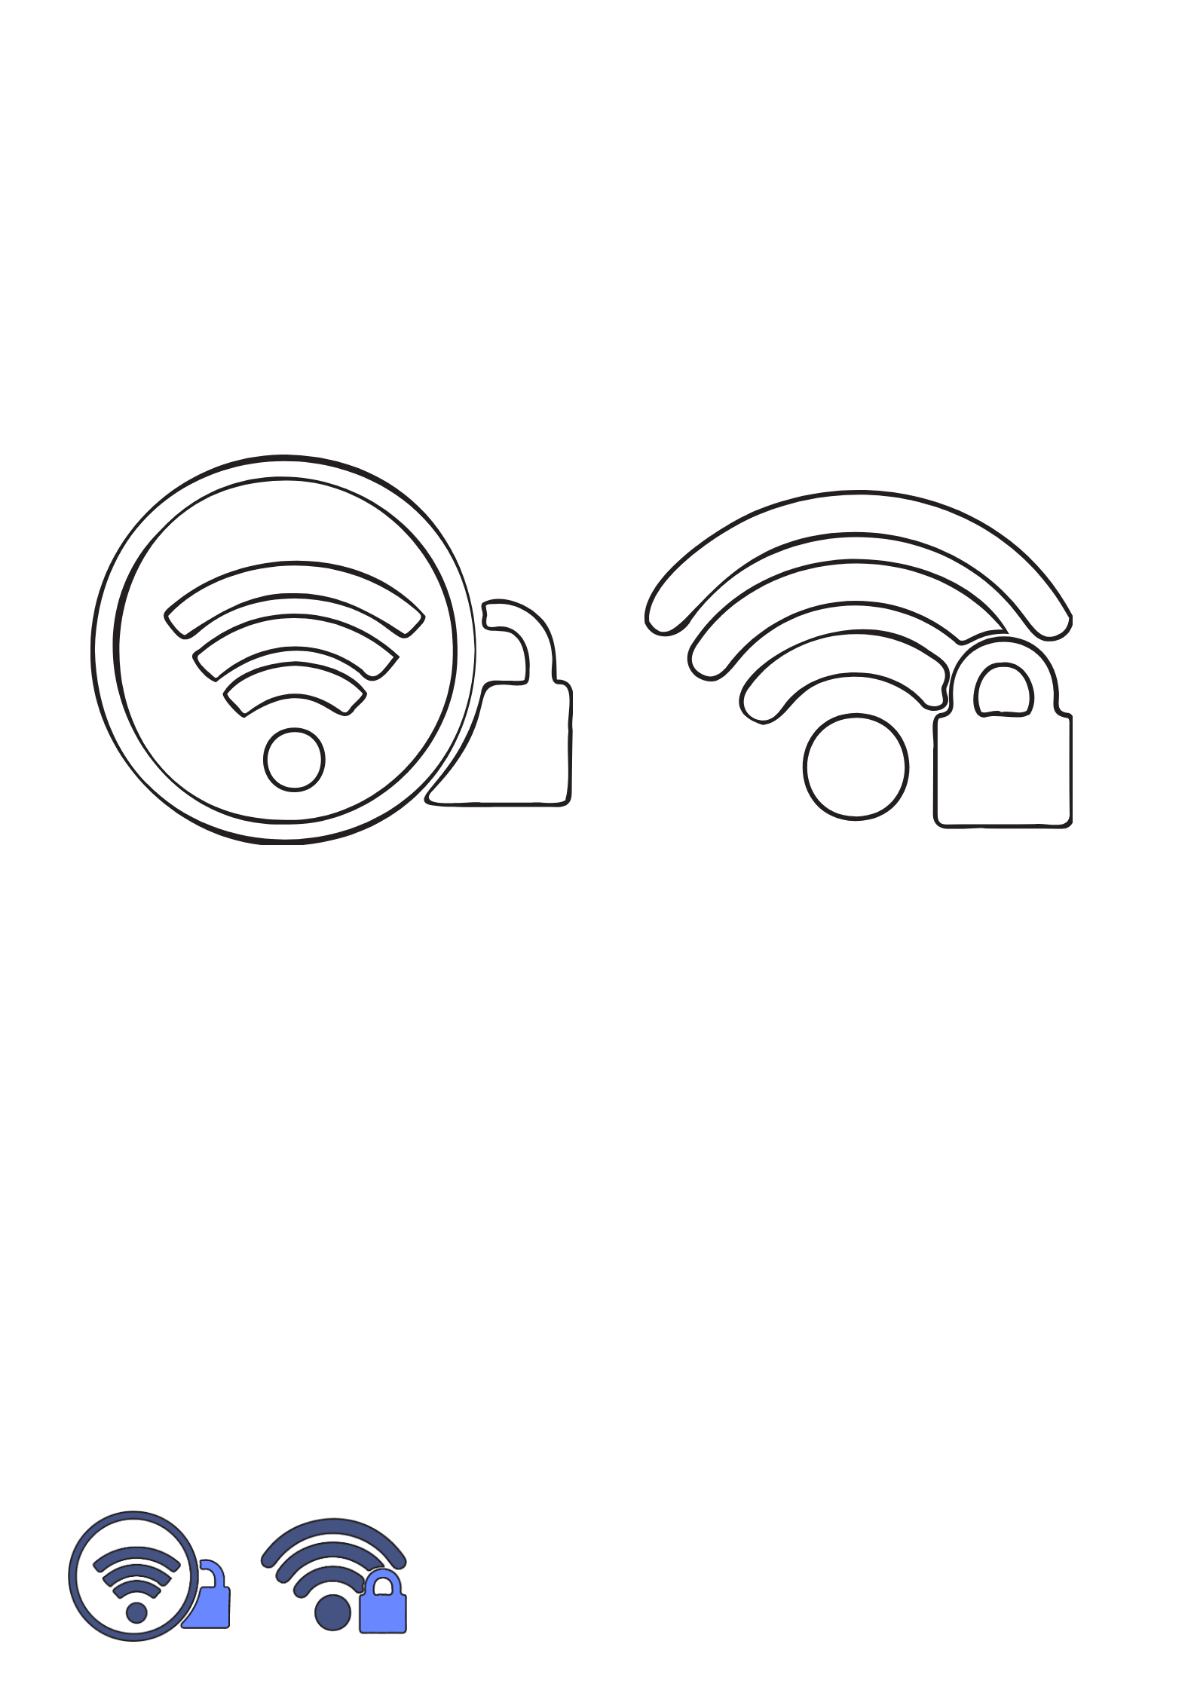 Free Secure Wifi coloring page Template